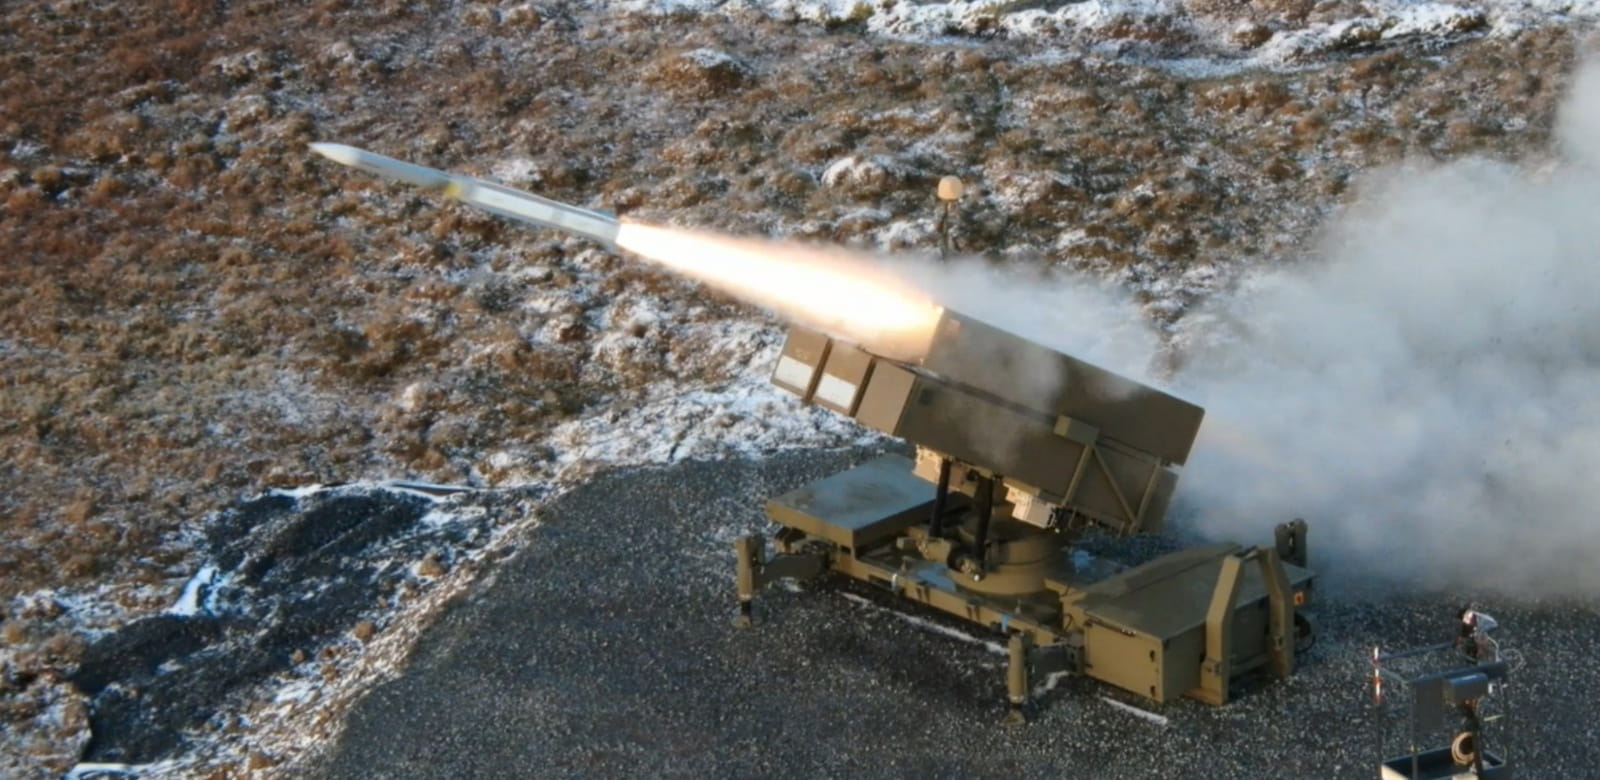 NASAMS is produced and supported by RMD in partnership with Norwegian company Kongsberg Defence & Aerospace. This medium-range air defense system has been operational for 30-plus years and is currently used by the U.S. and 11 allied nations. (Photo: Kongsberg Defence and Aerospace)